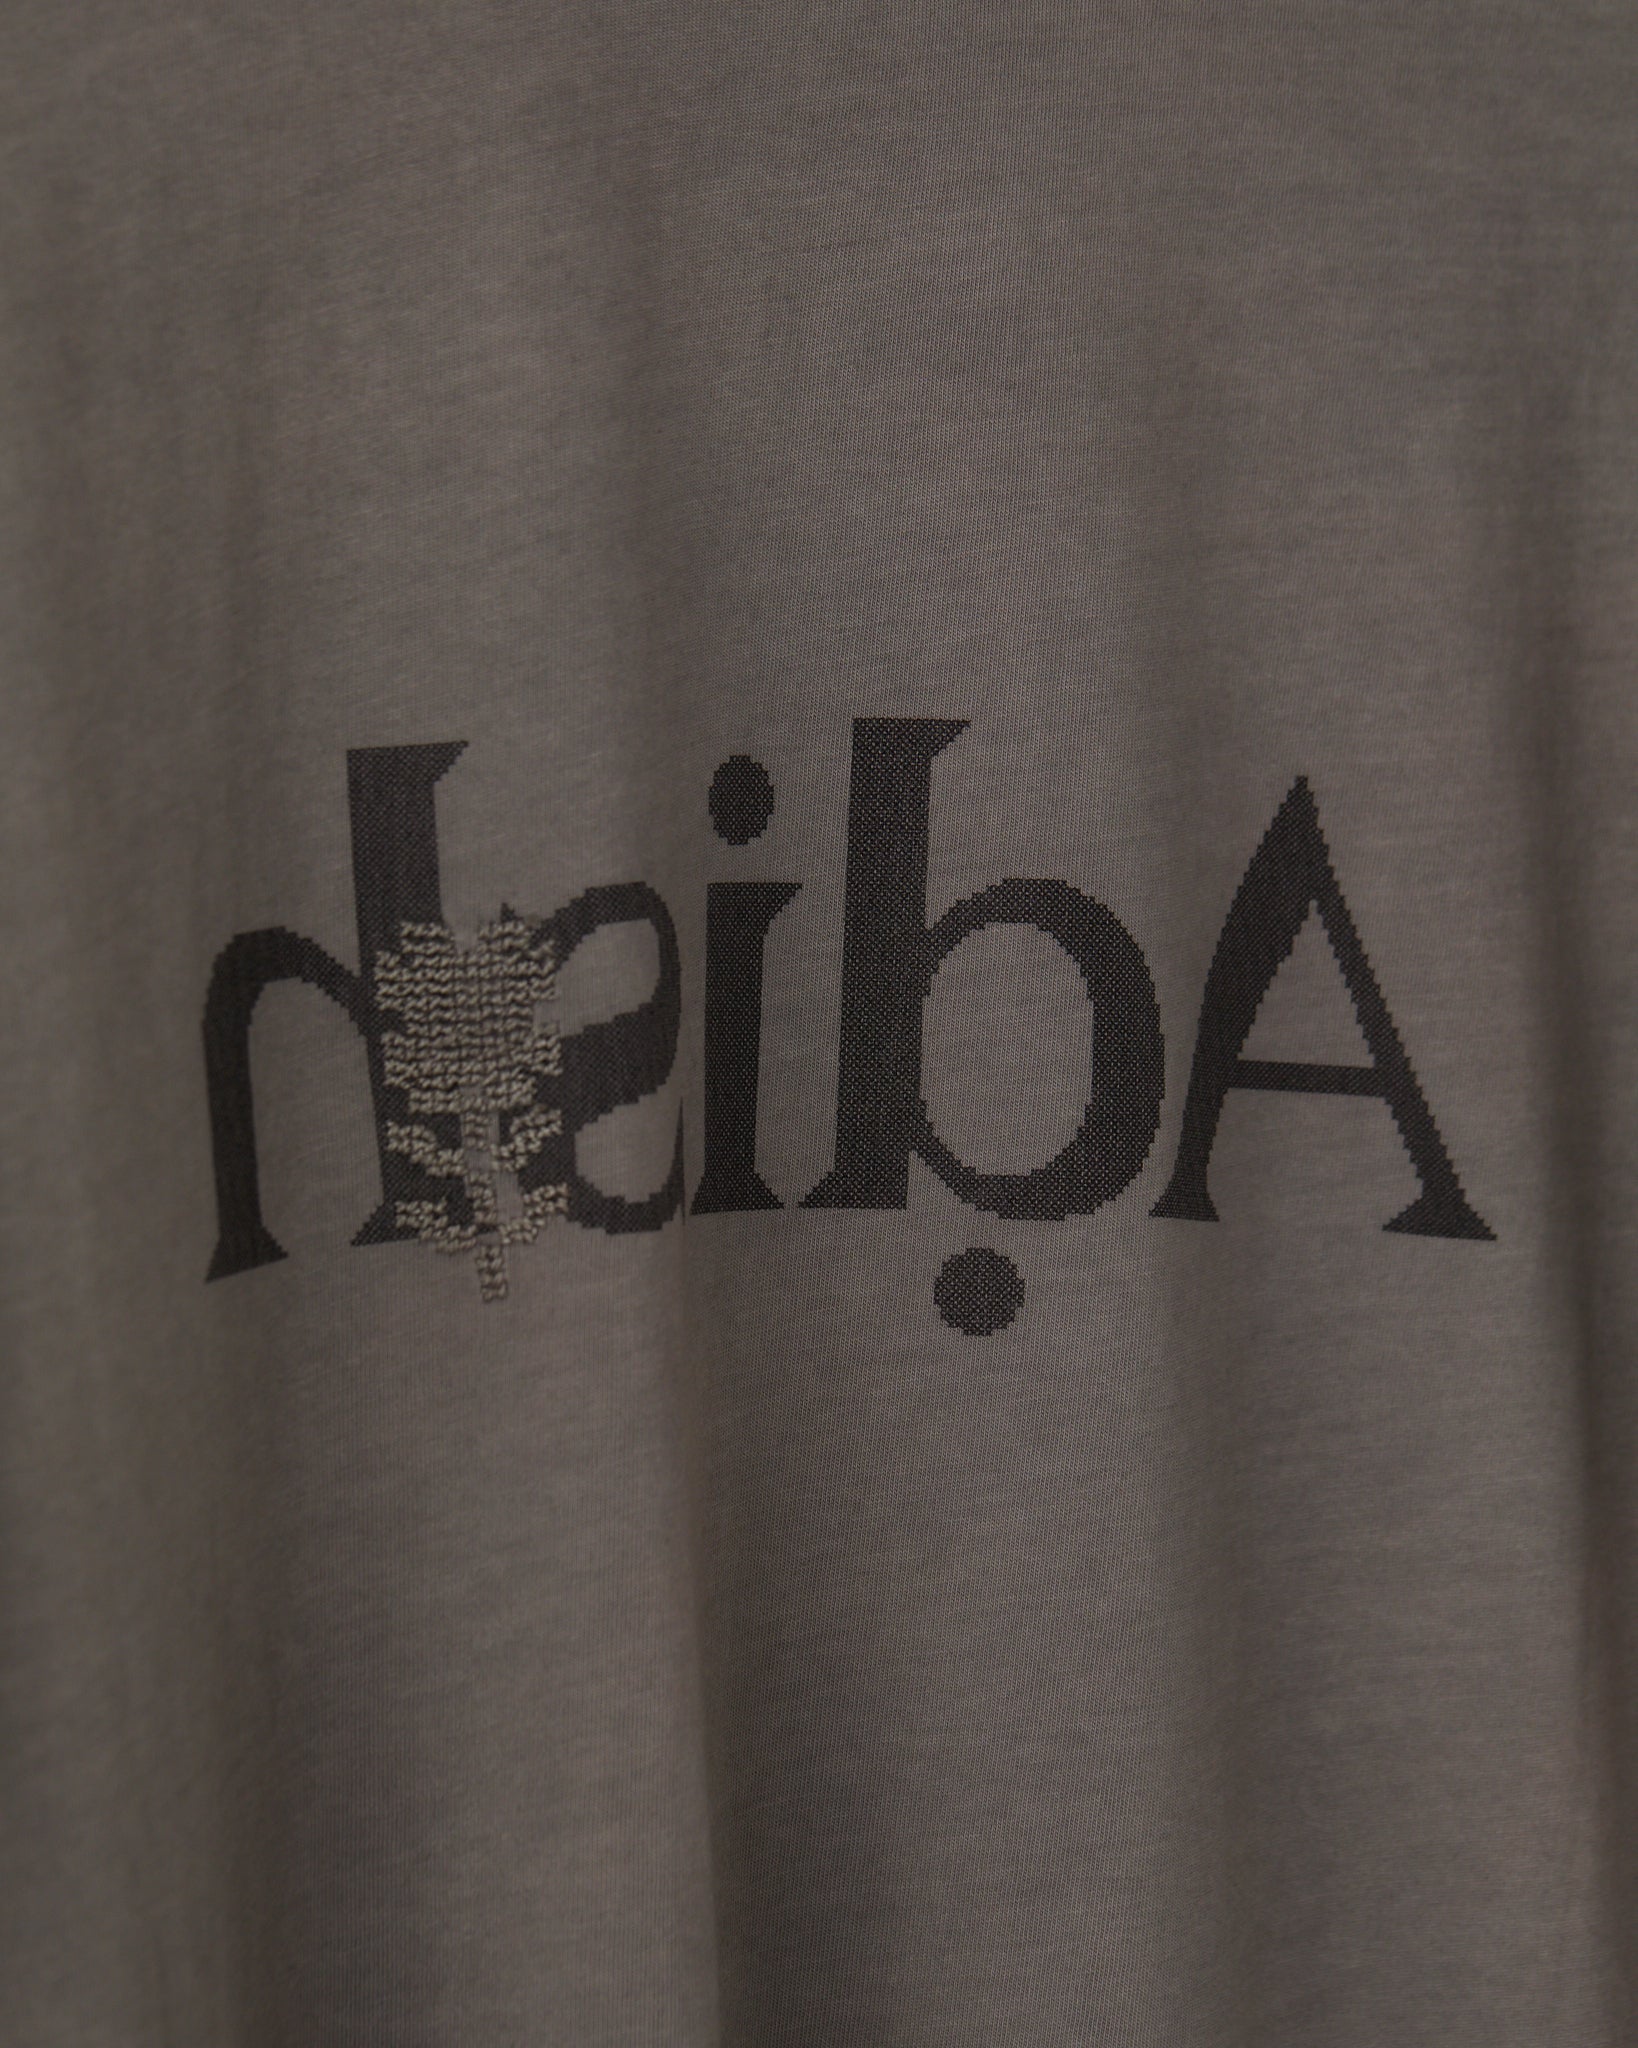 Colbo Exclusive Wared Garment Dyed T Shirt